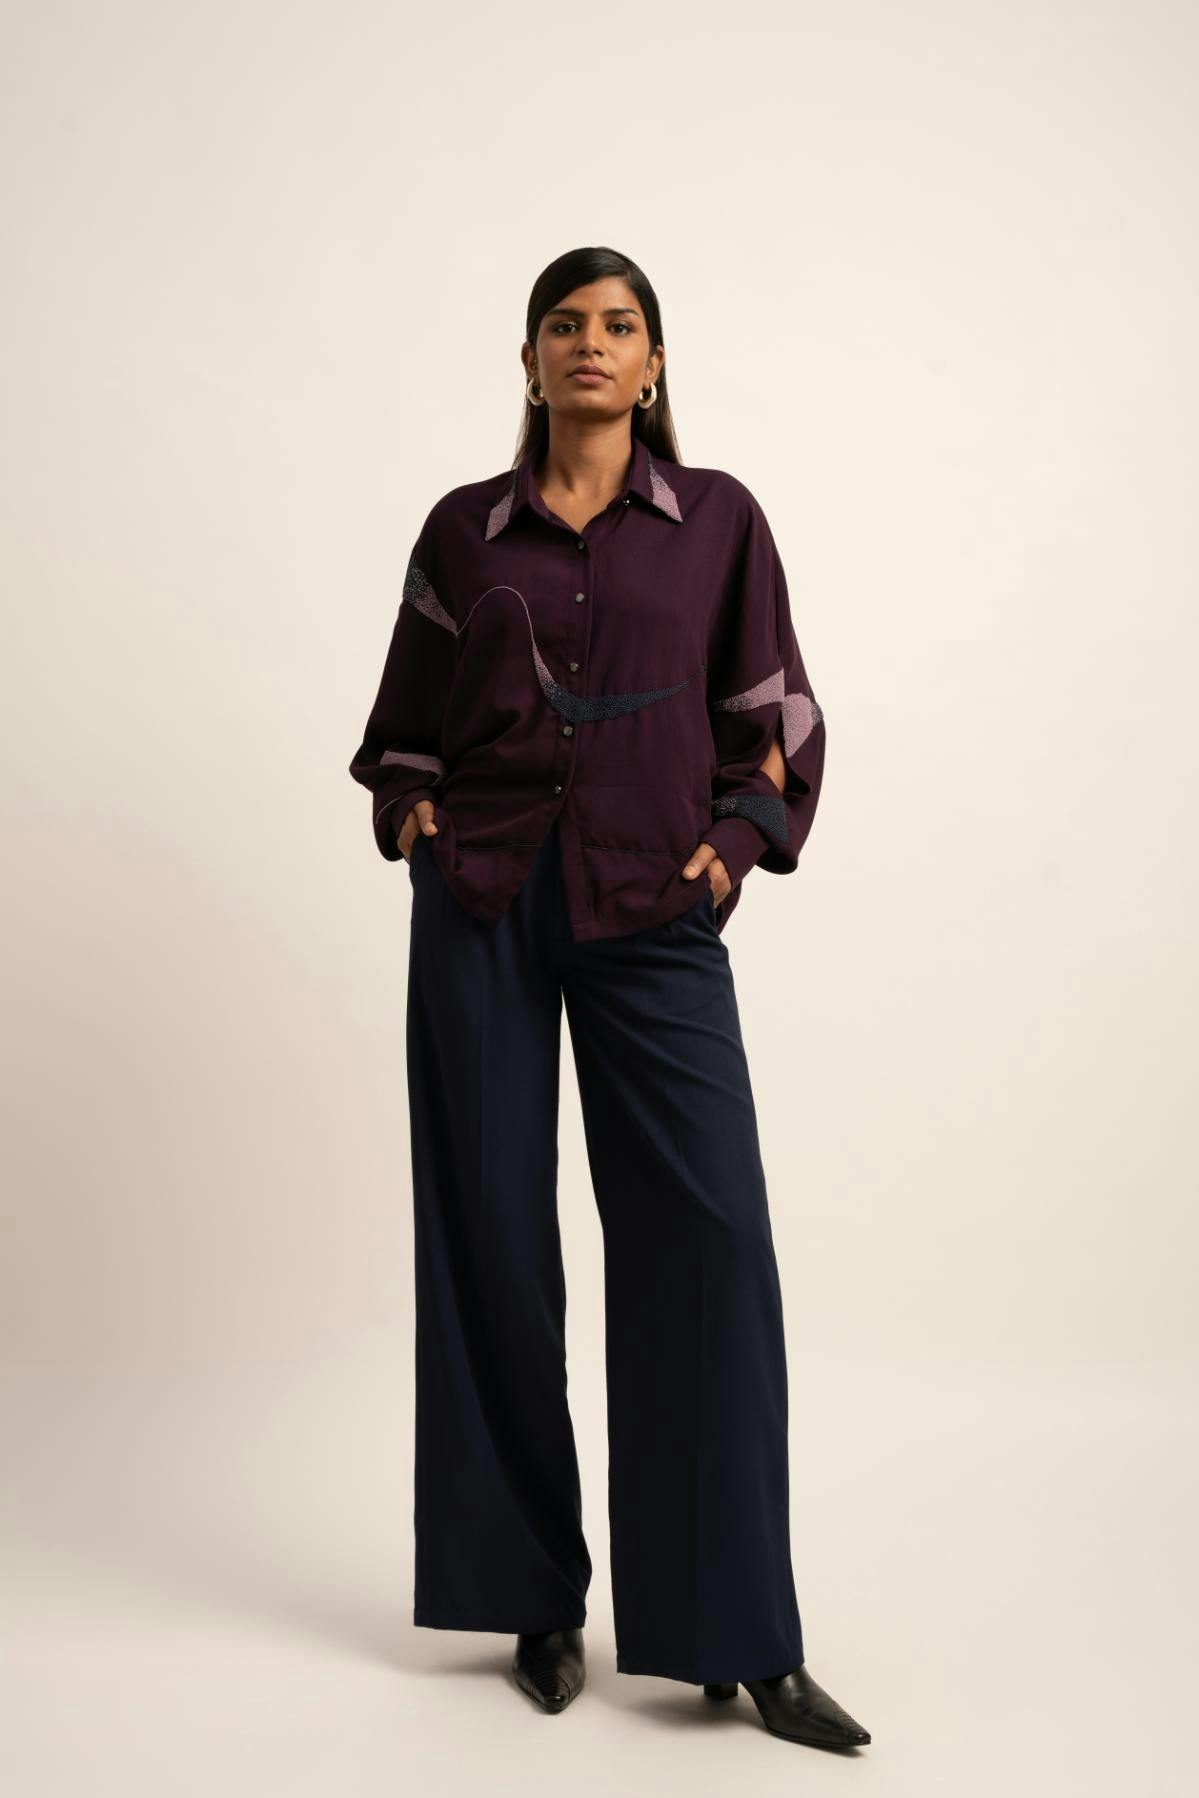 The Deep Blue Trousers, a product by Siddhant Agrawal Label